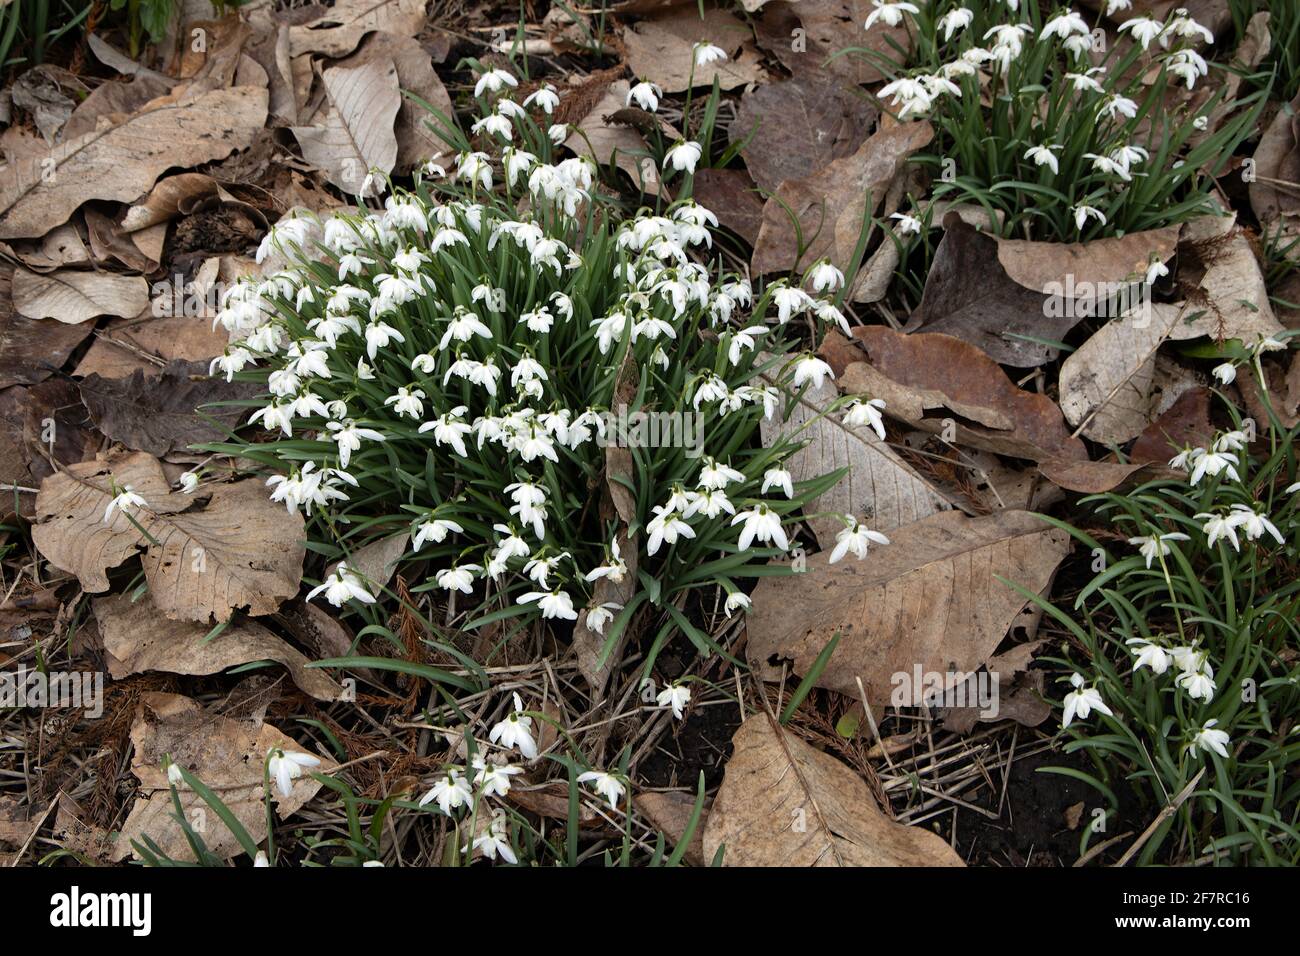 A clump of snowdrops amongst dead leaves Stock Photo